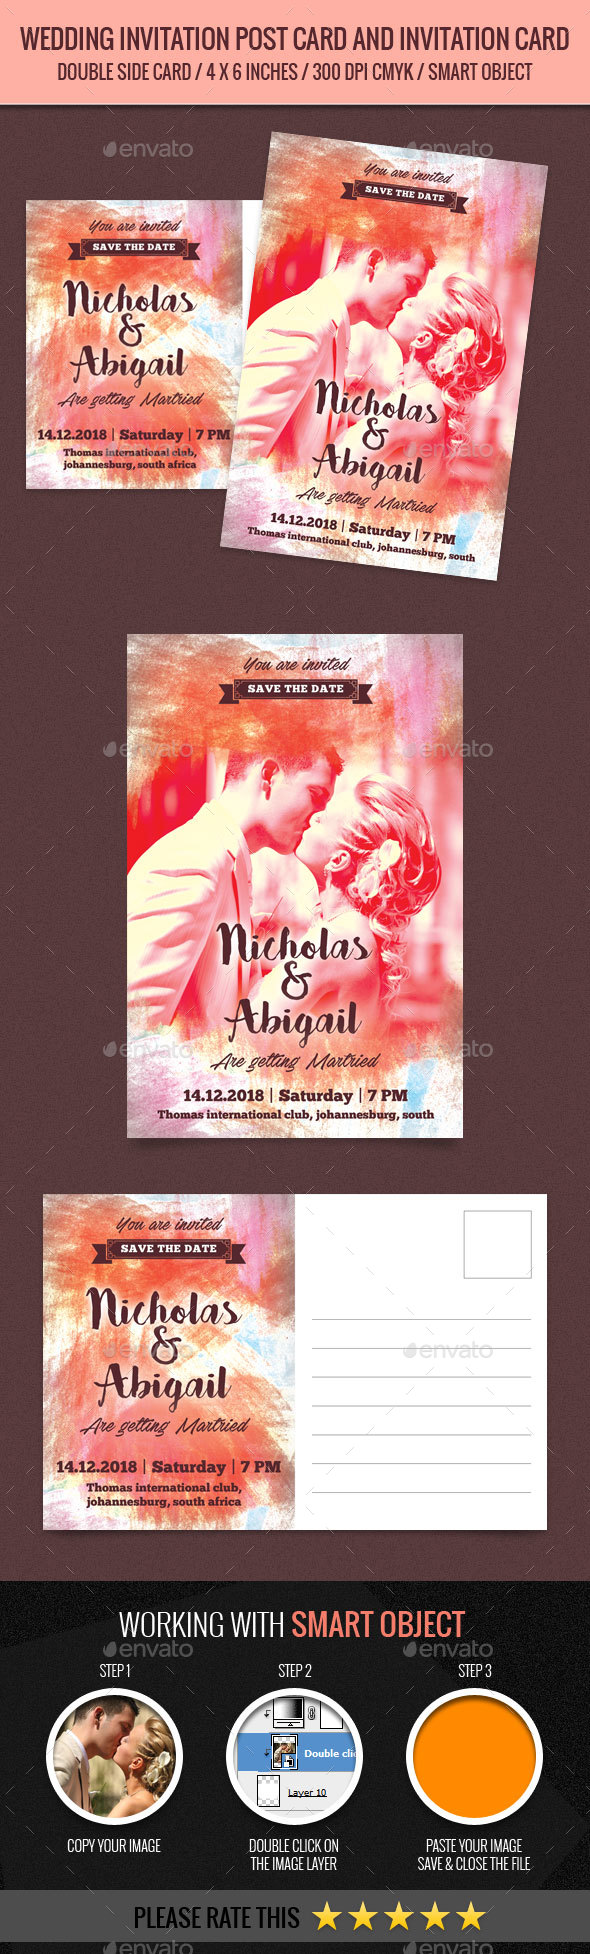 Wedding and Marriage Invitation Post Card